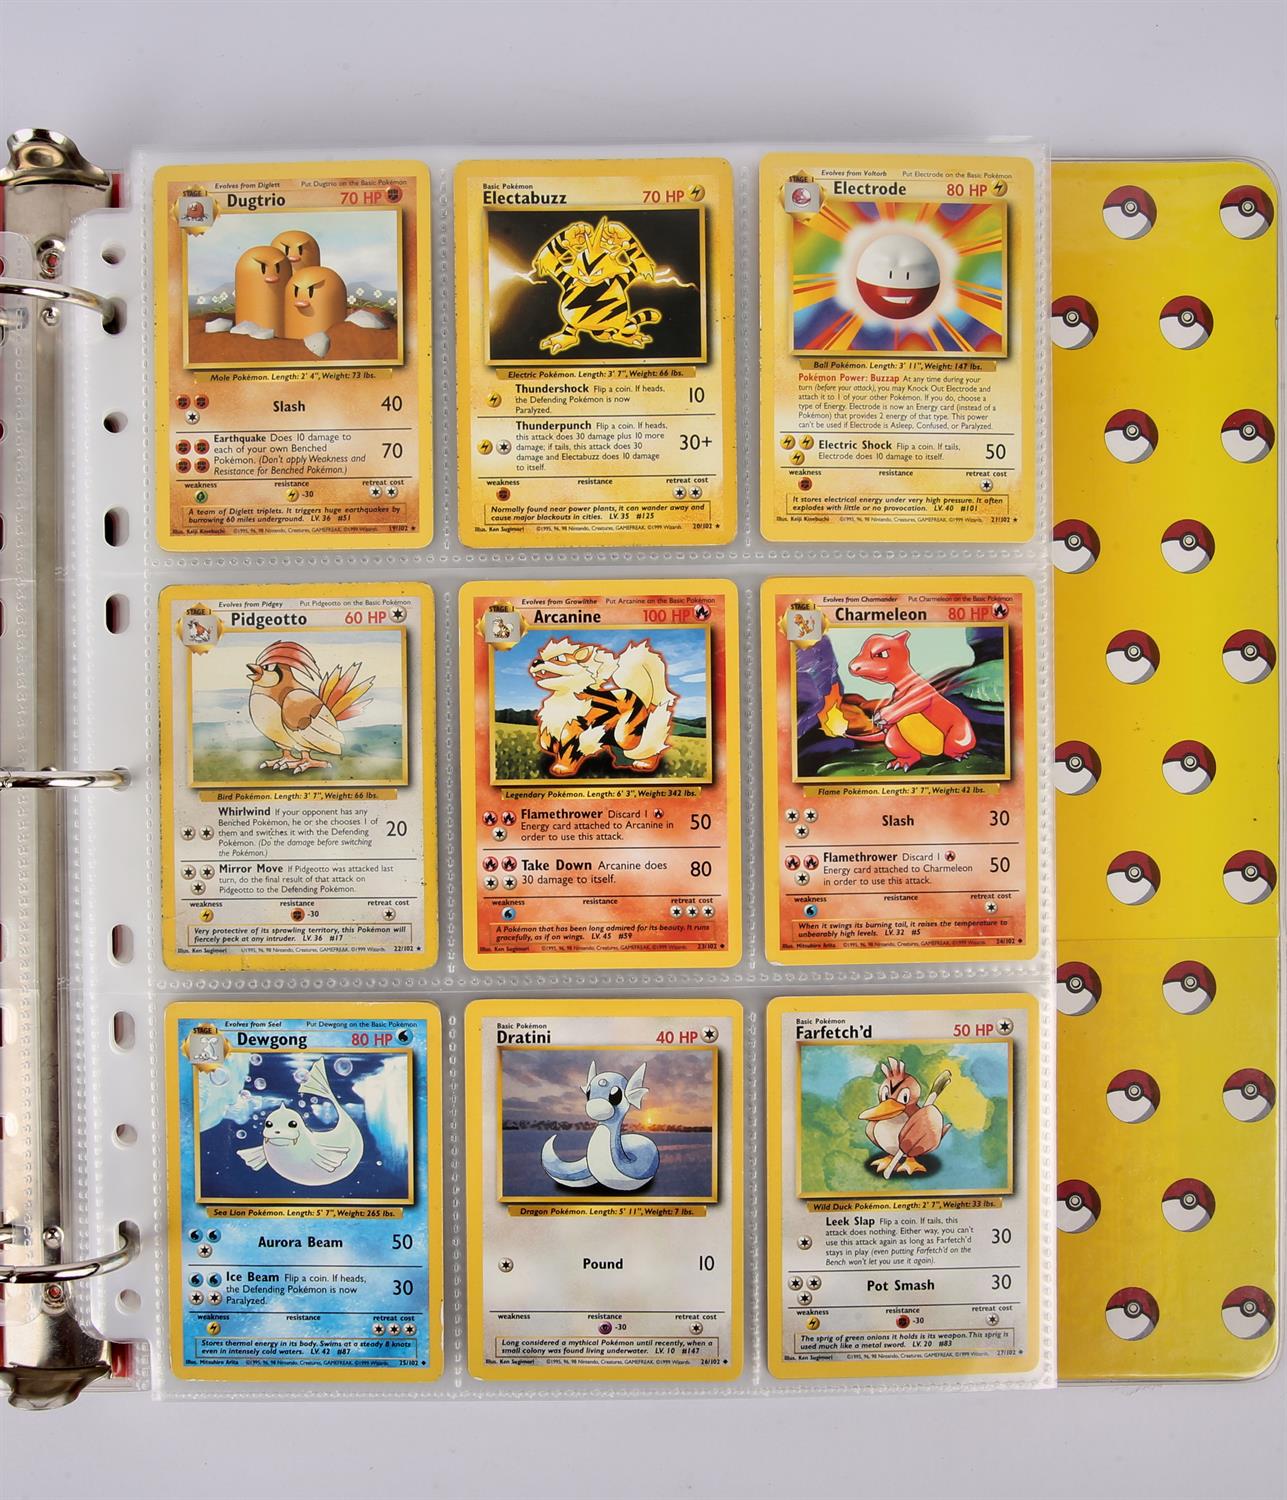 Pokémon TCG - Complete Base Set, Jungle, Fossil & Charizard PG 7 - Unlimited. This lot contains a - Image 2 of 5